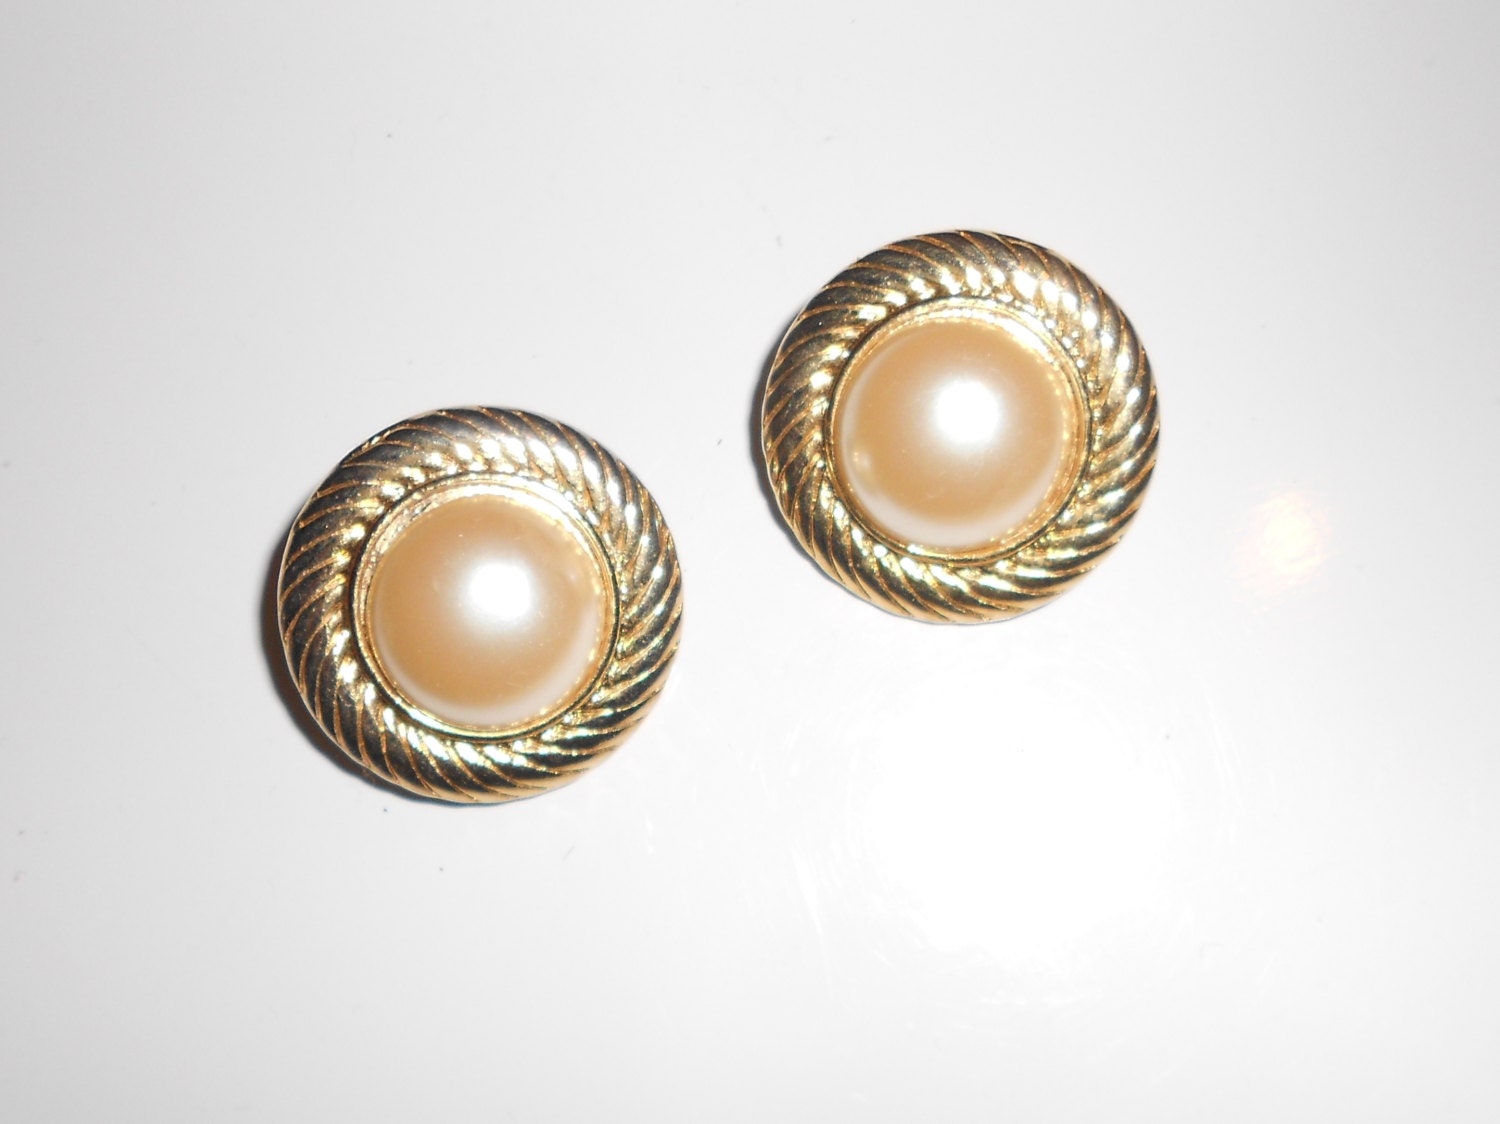 Preppy vintage earrings 1950s clip on faux pearl and roped